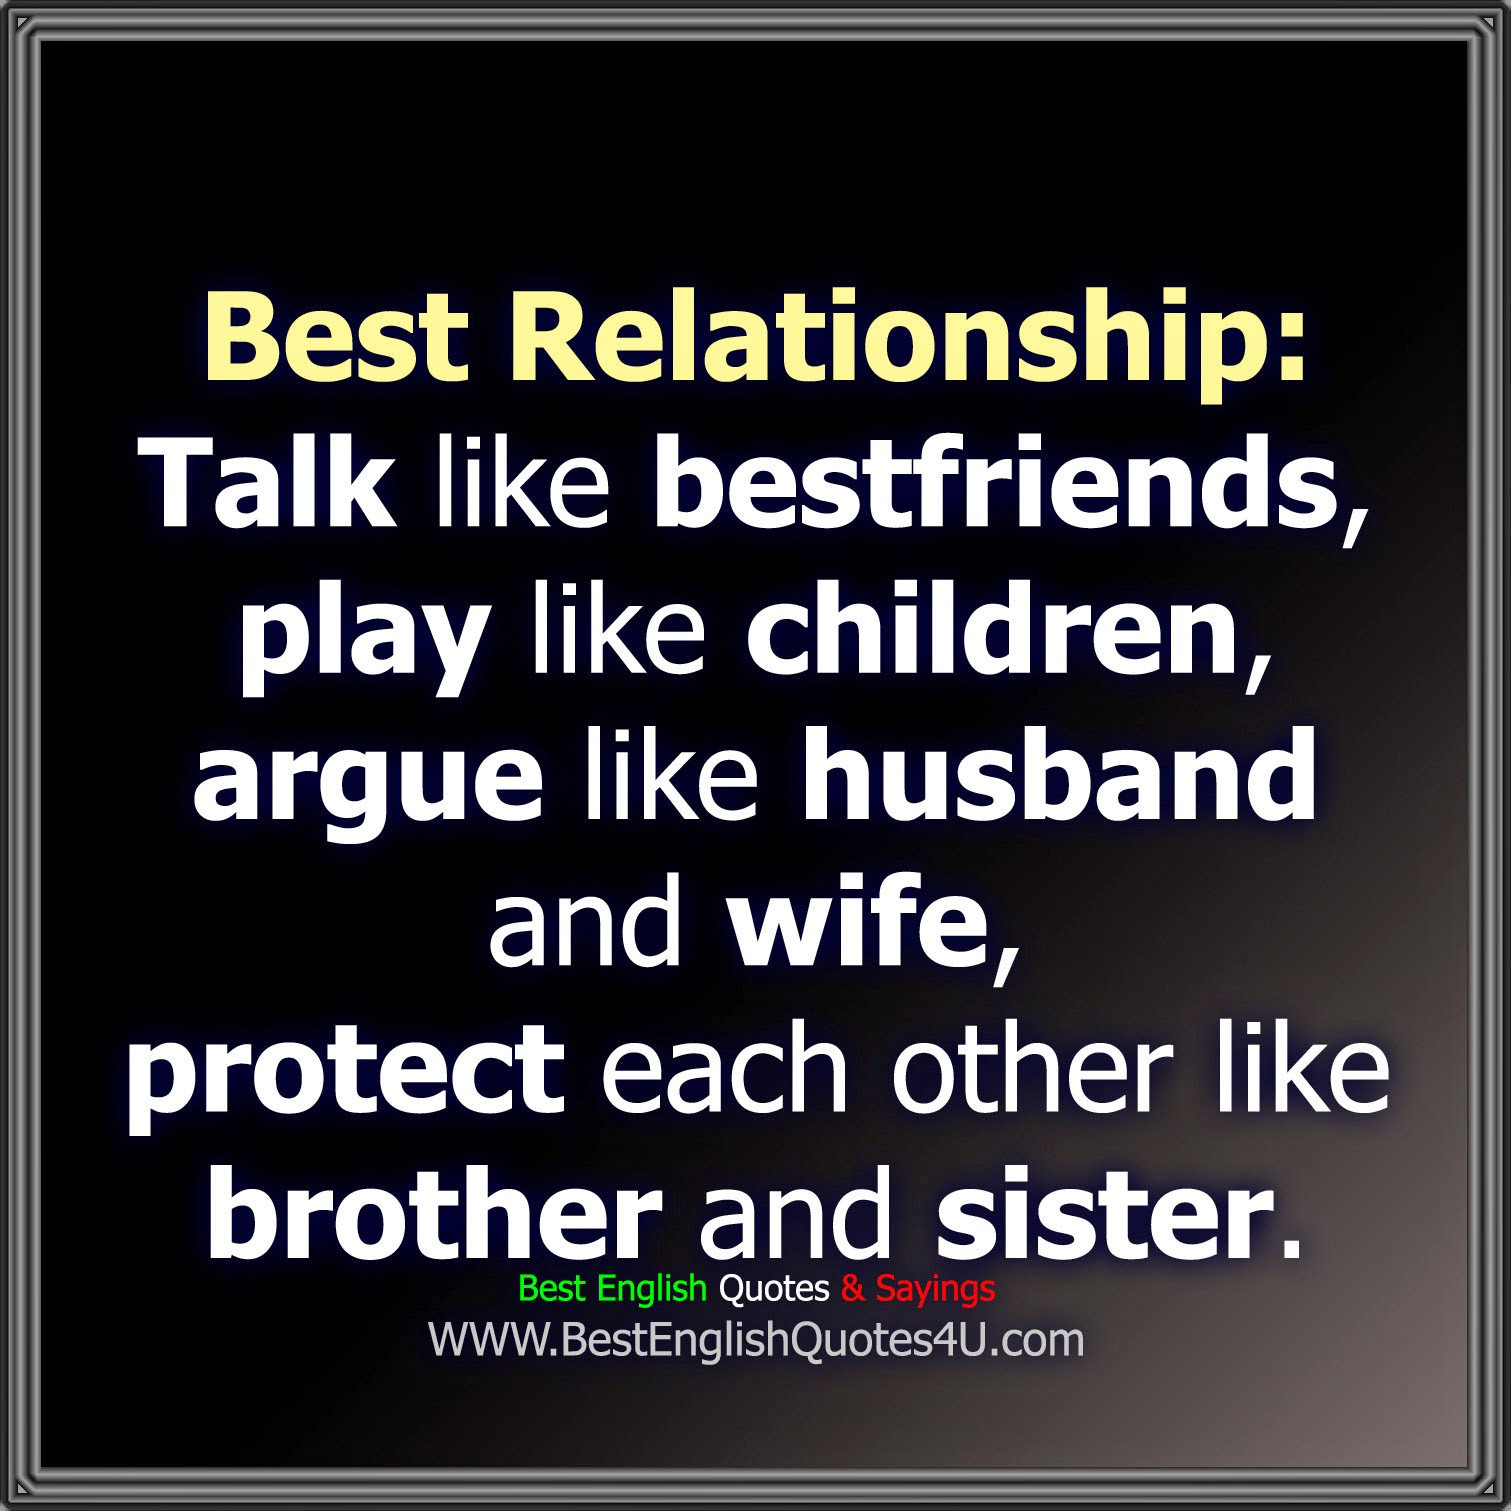 The Best Relationship Quotes
 Best Relationship